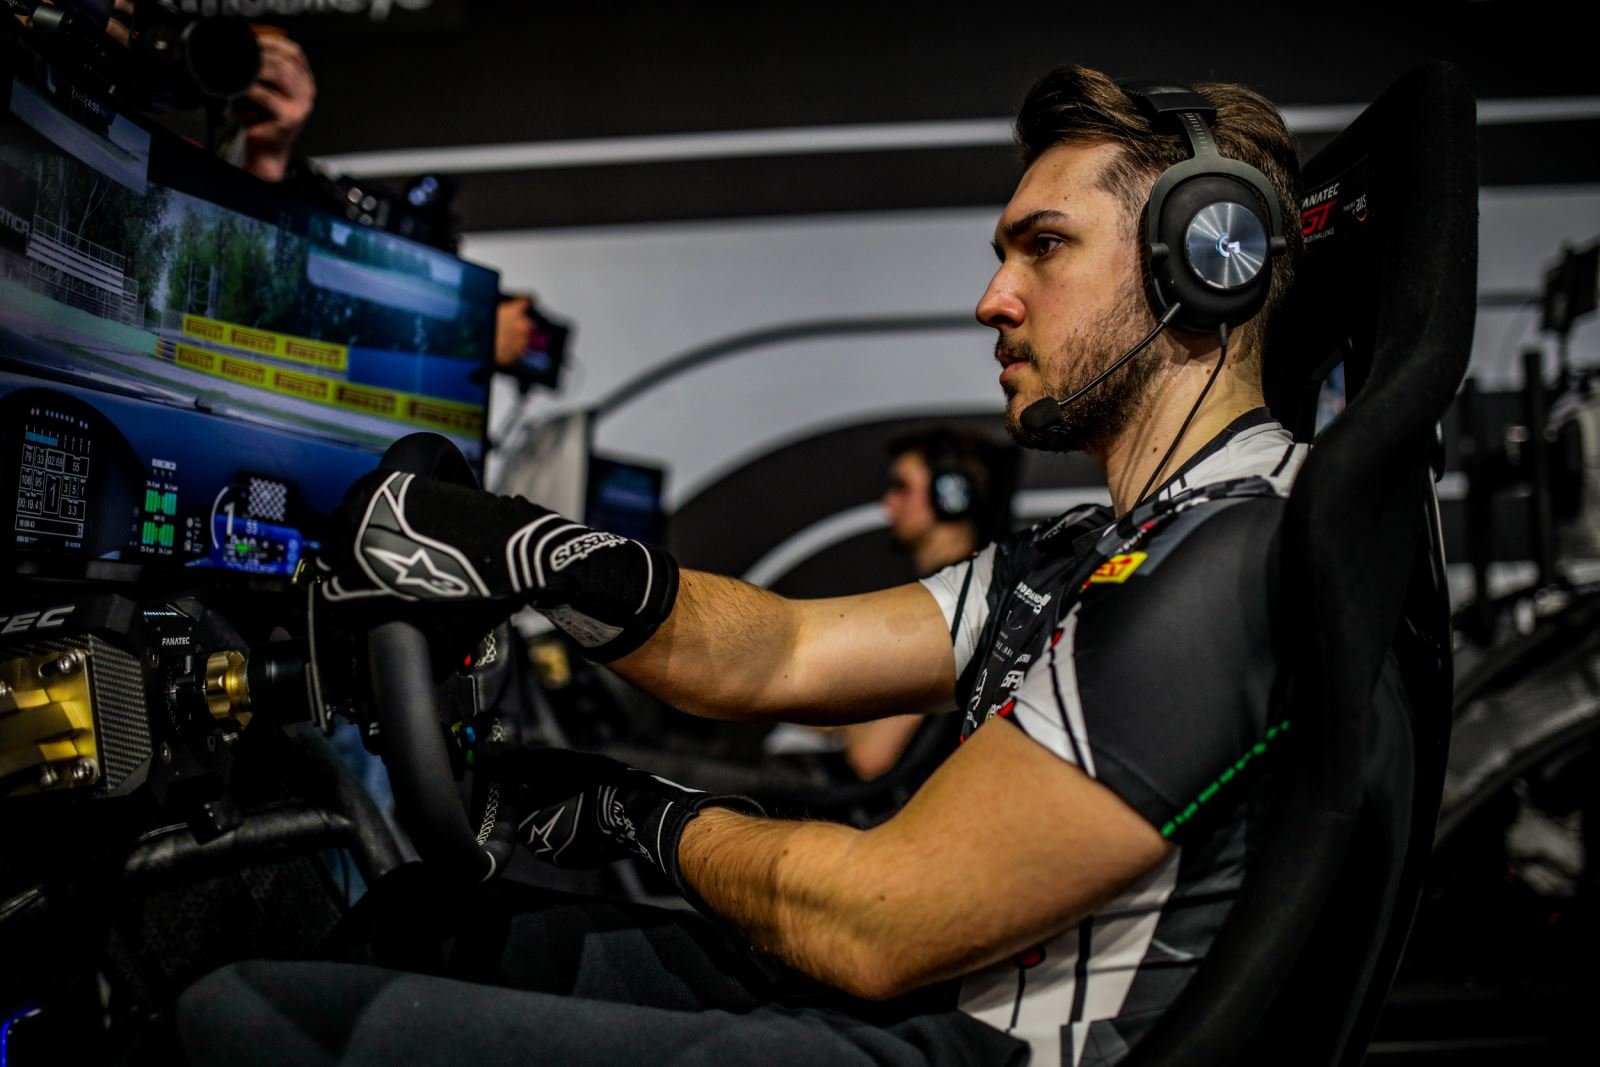 The best of real and virtual collide again as the SRO Esports season heads to Circuit Paul Ricard